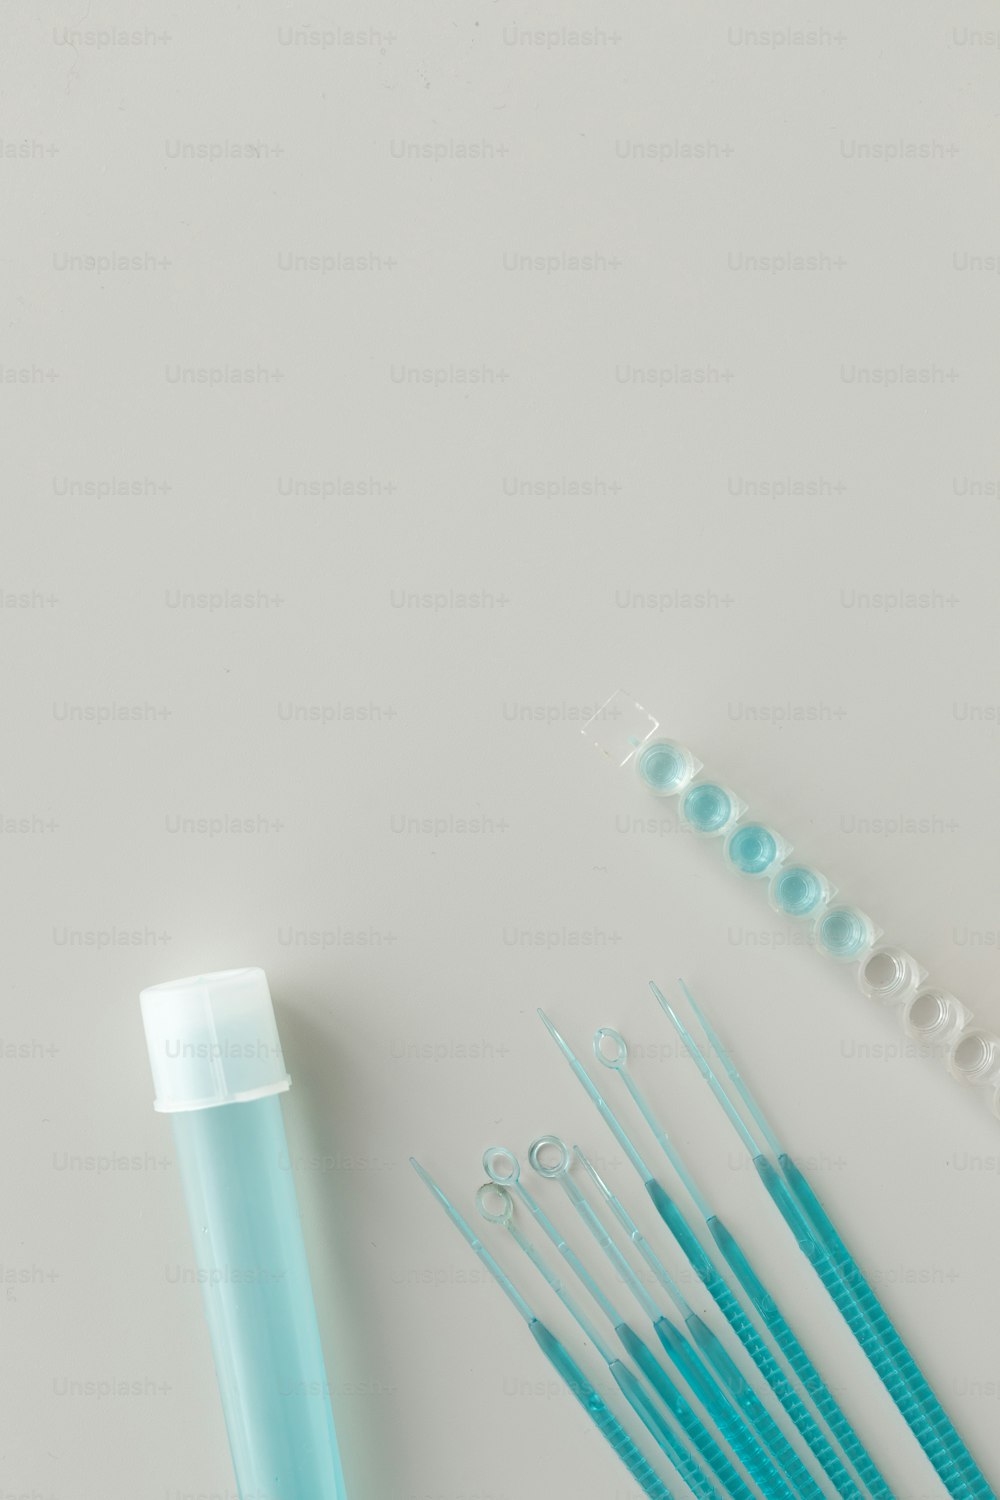 a group of blue toothbrushes sitting next to a tube of toothpaste